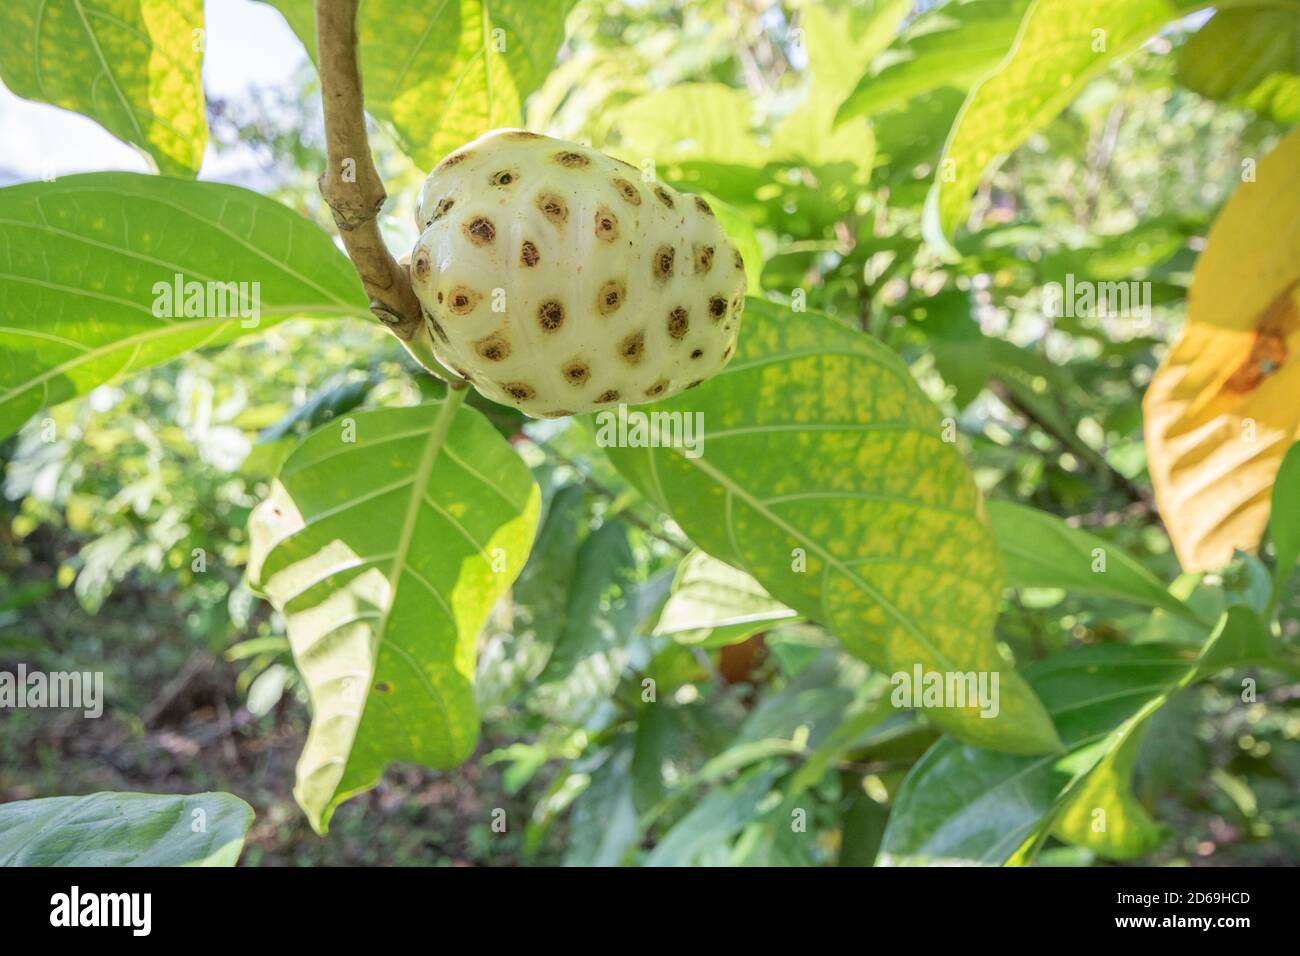 Fruit on the Noni tree (Morinda citrifolia) - it has a strong not-so-pleasant smell and is seen growing here in Peru. Stock Photo